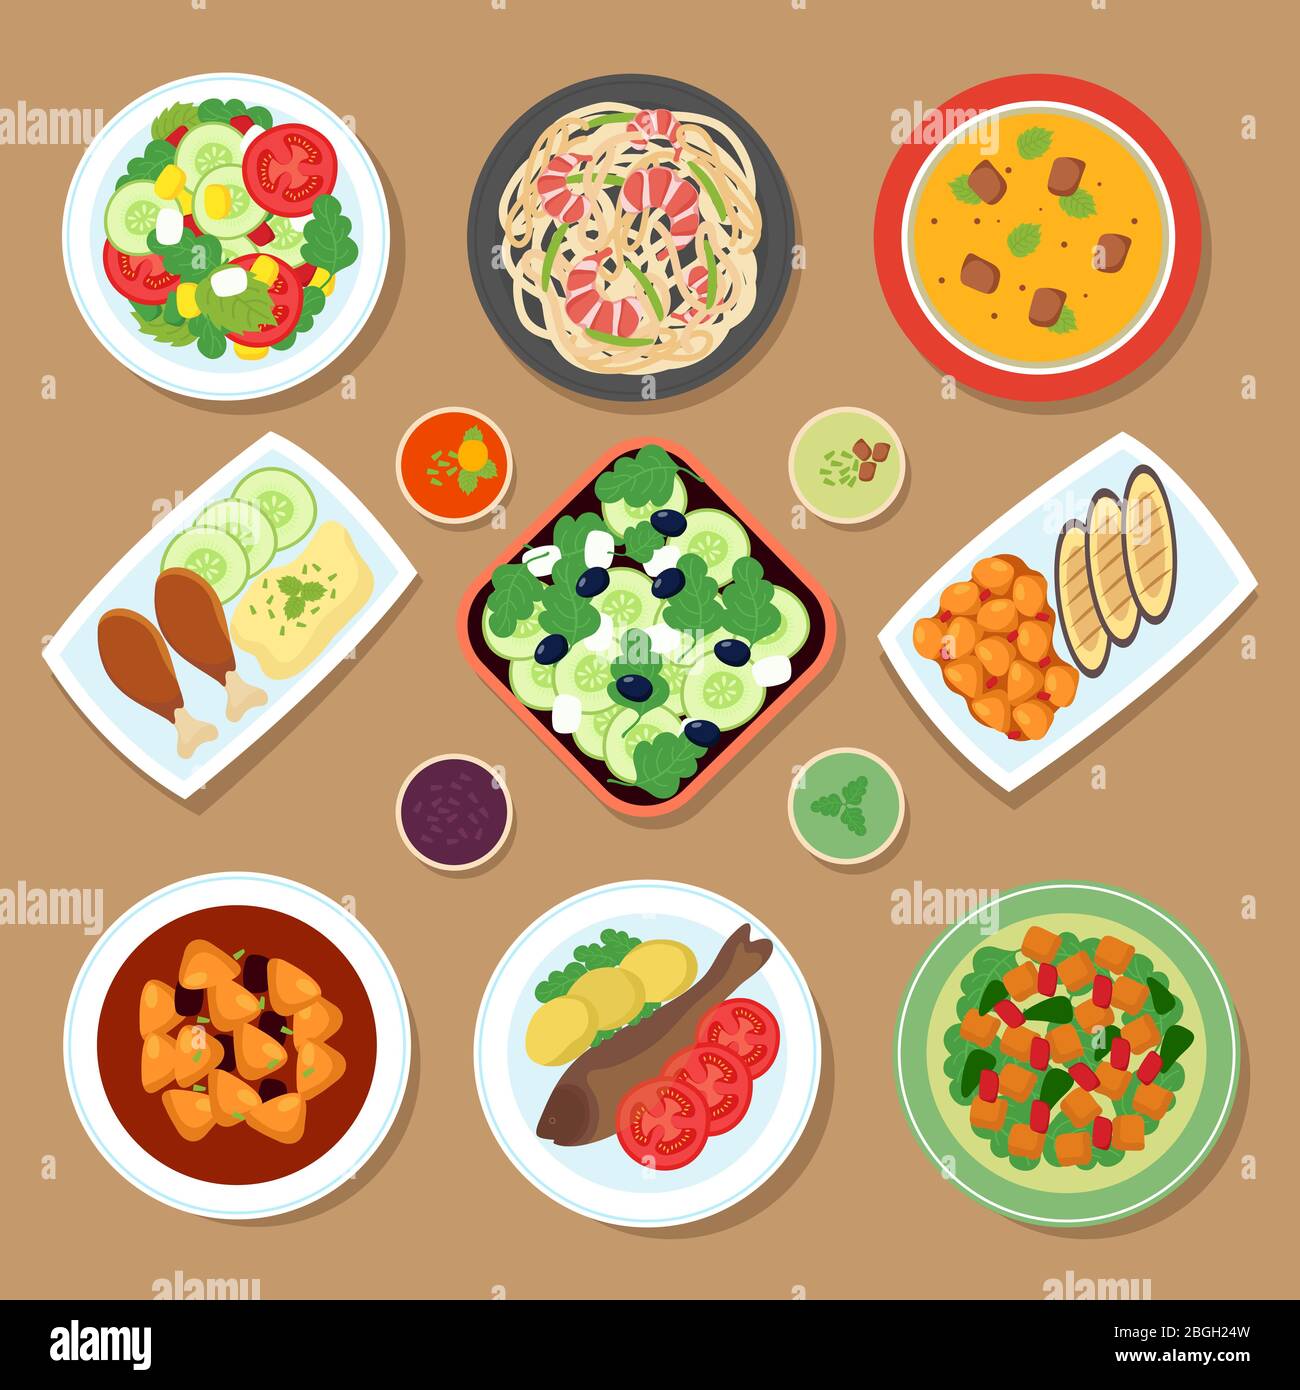 Top view dinner table with european dishes and japanese cuisine meal. Cartoon food vector set isolated. Illustration of menu plate with meal, set of traditional cooking Stock Vector